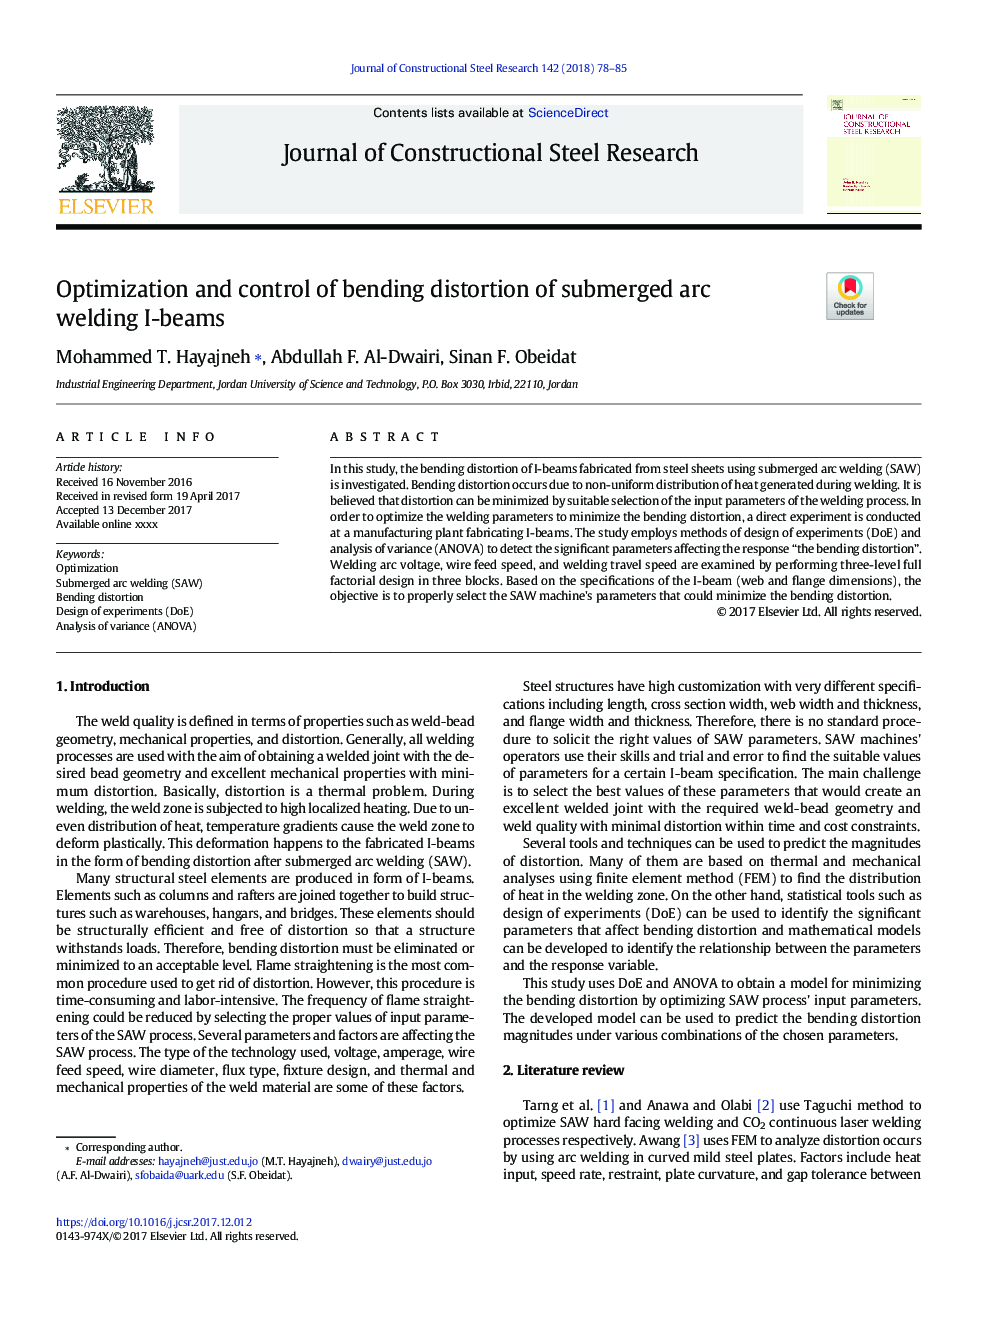 Optimization and control of bending distortion of submerged arc welding I-beams